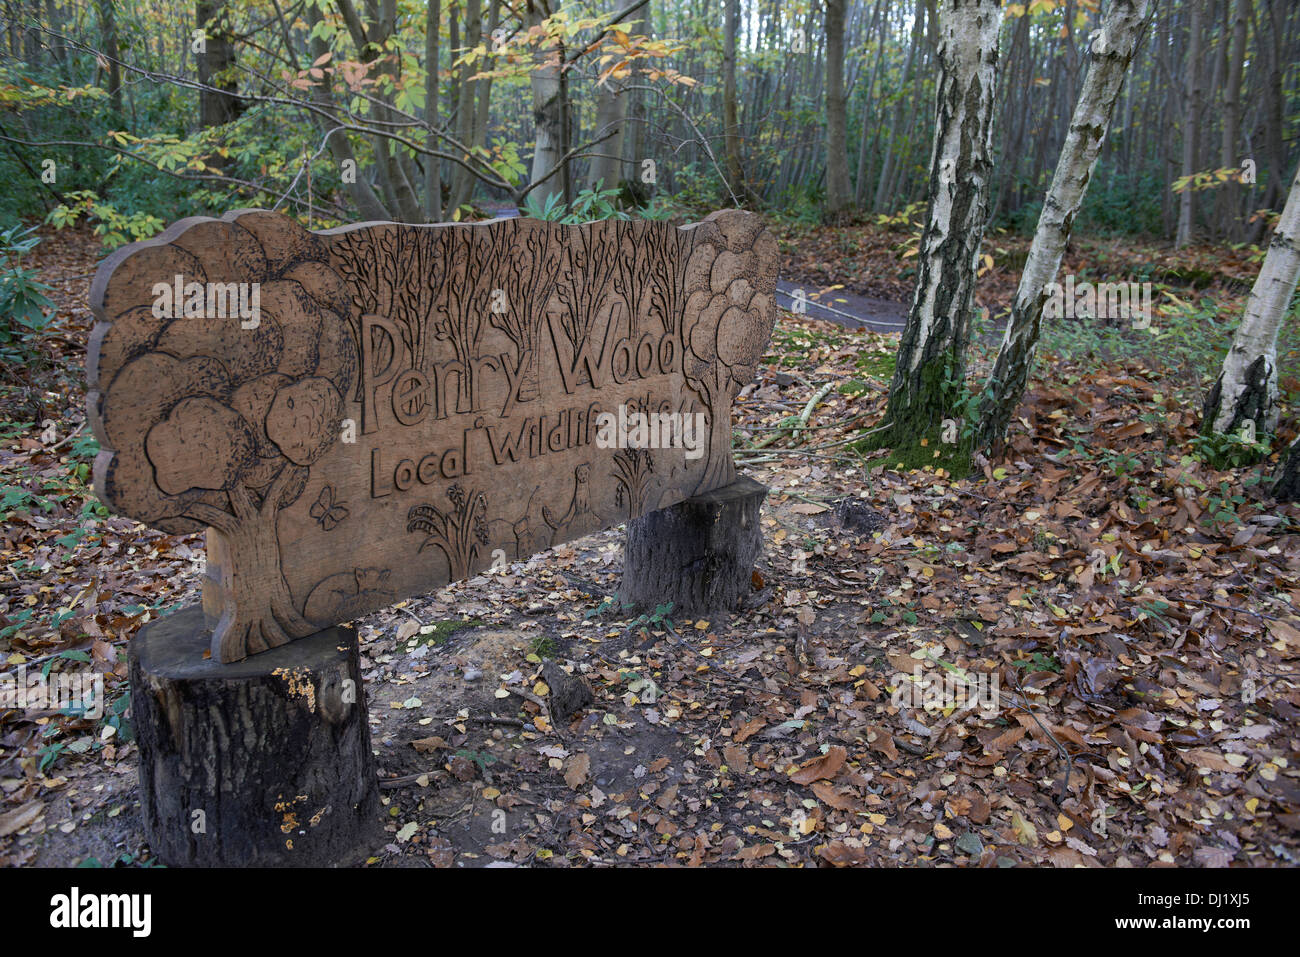 Carved wooden sign for Perry Wood in Kent England Stock Photo